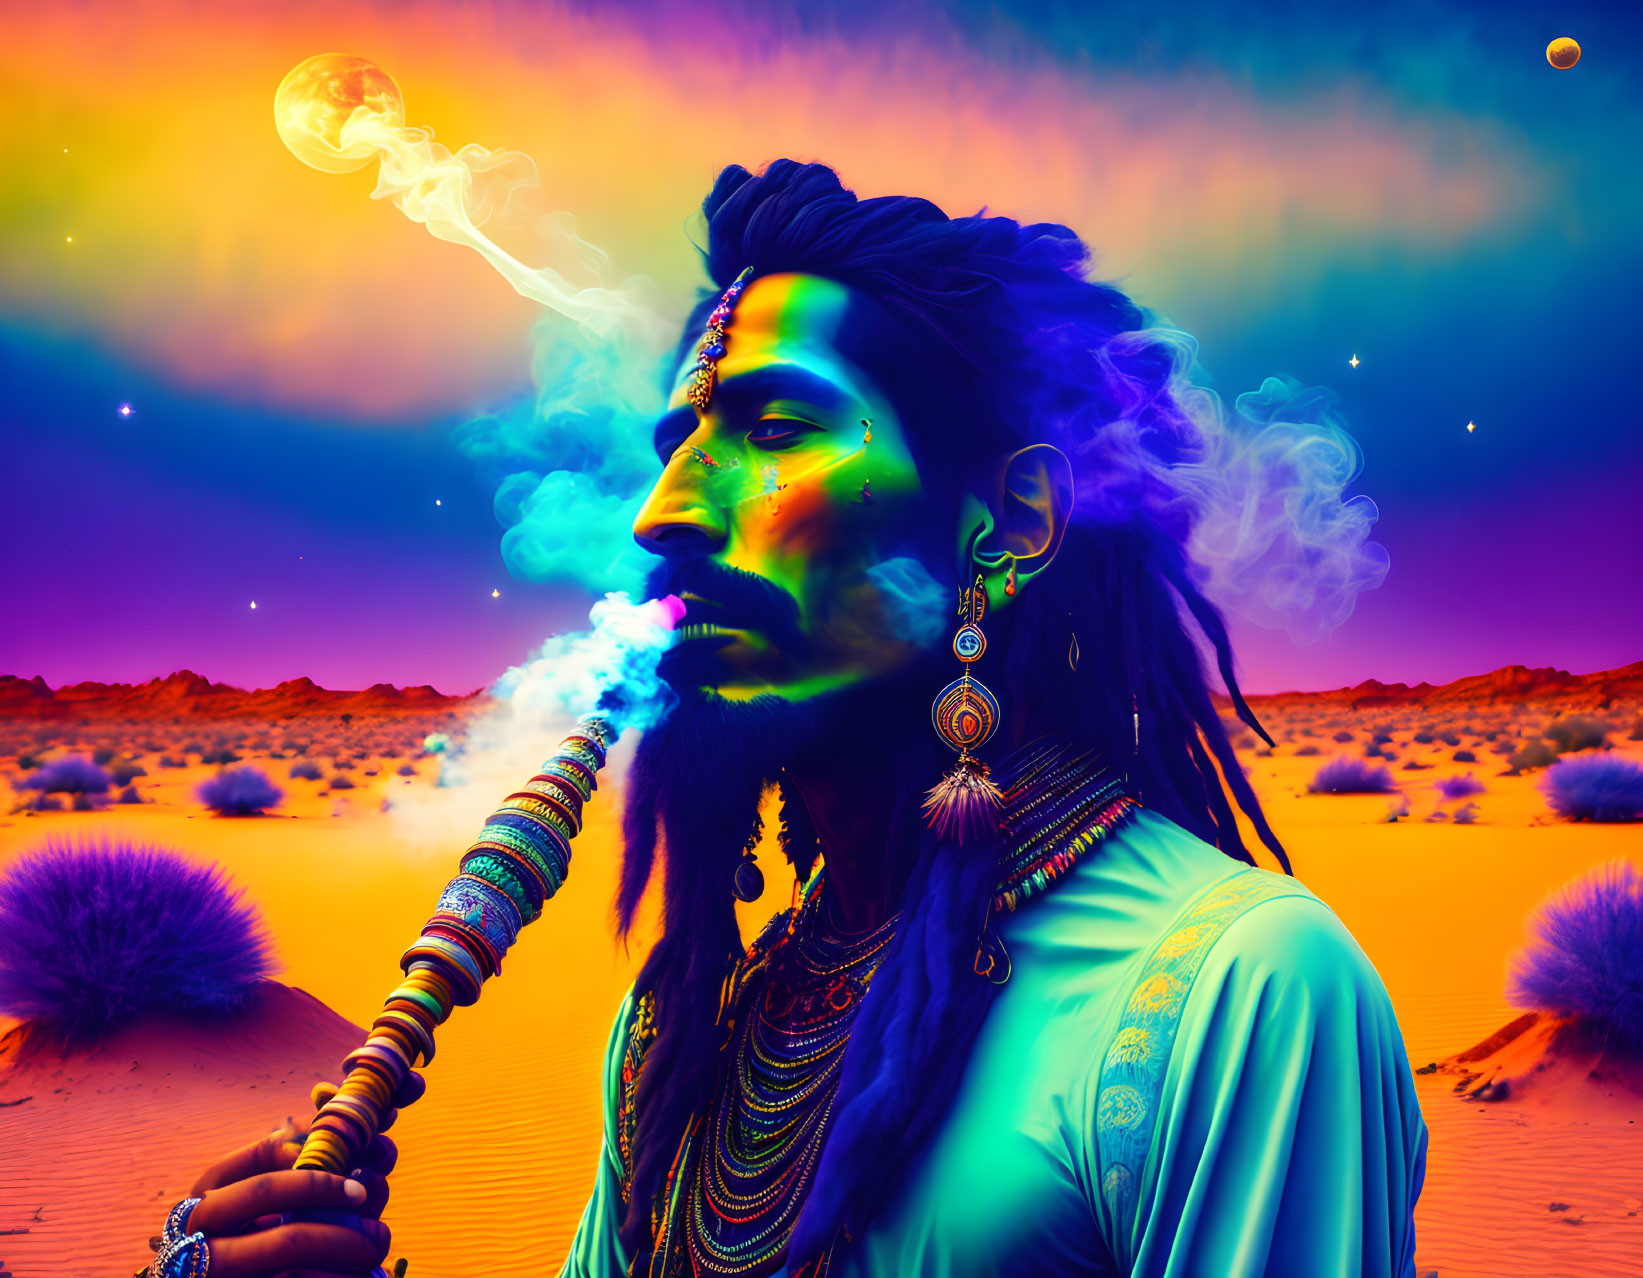 Colorful Man with Traditional Adornments Smoking Pipe in Psychedelic Desert Landscape